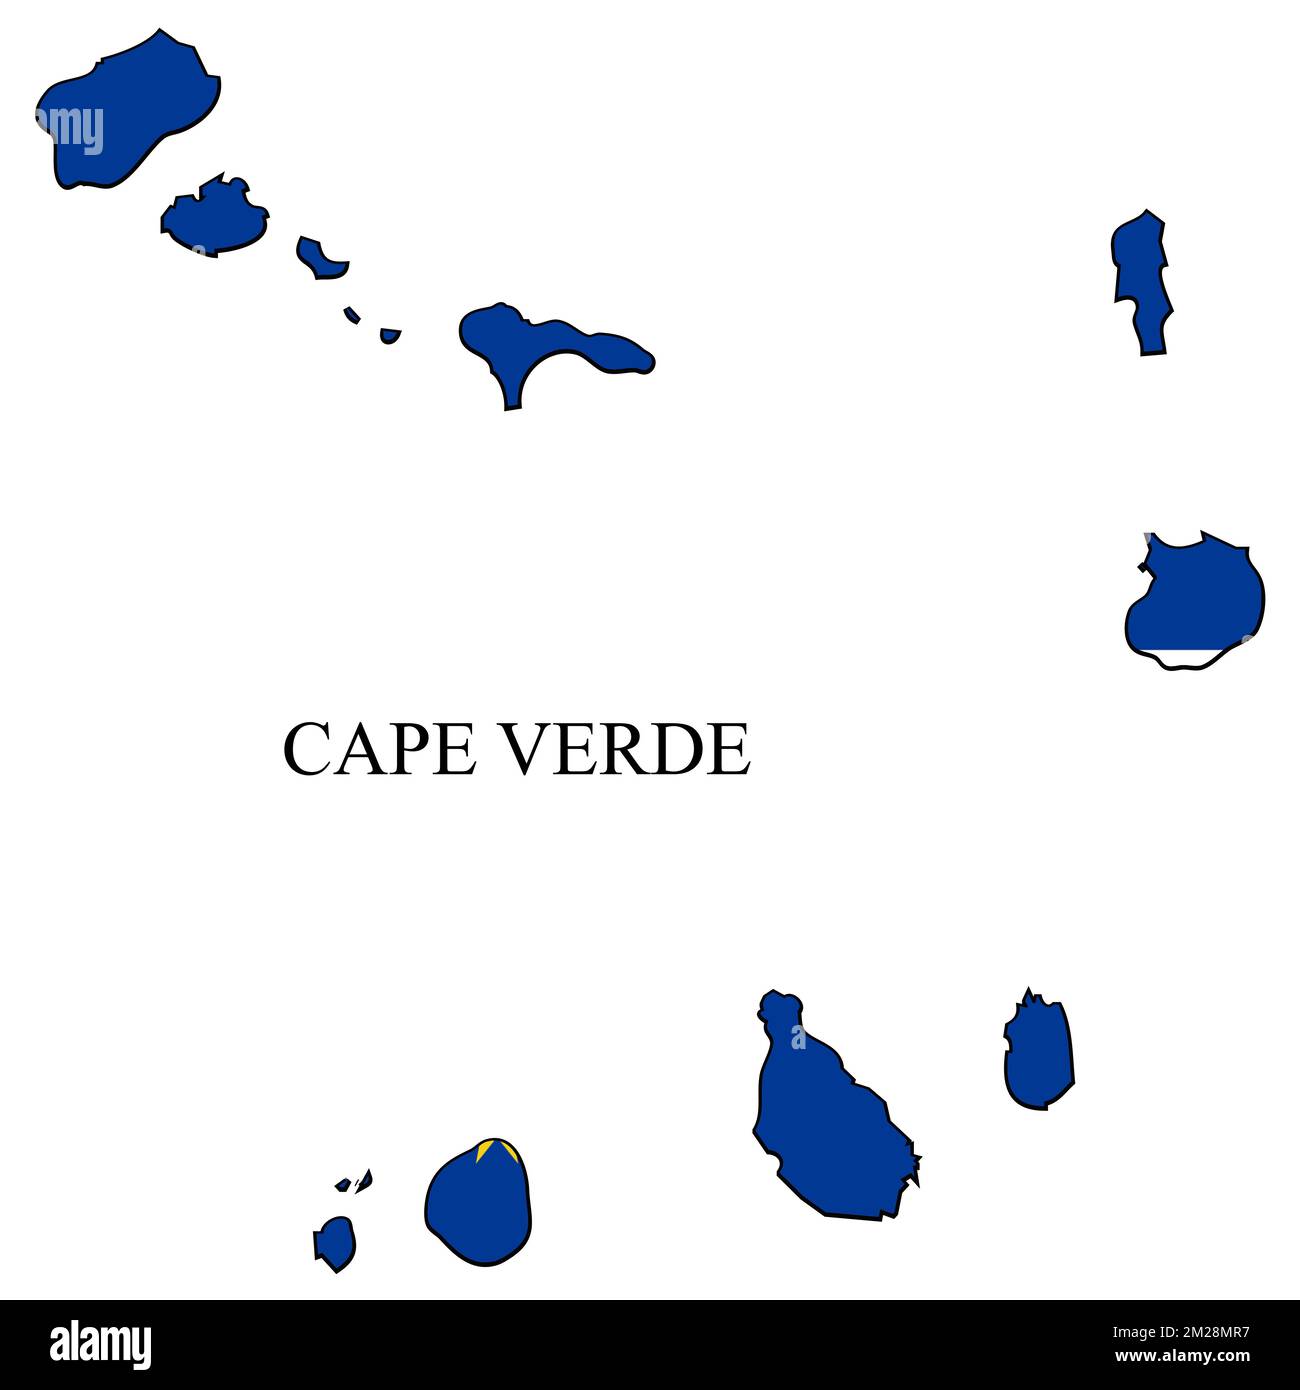 Cape Verde map vector illustration. Global economy. Famous country. Western Africa. Africa. Stock Vector